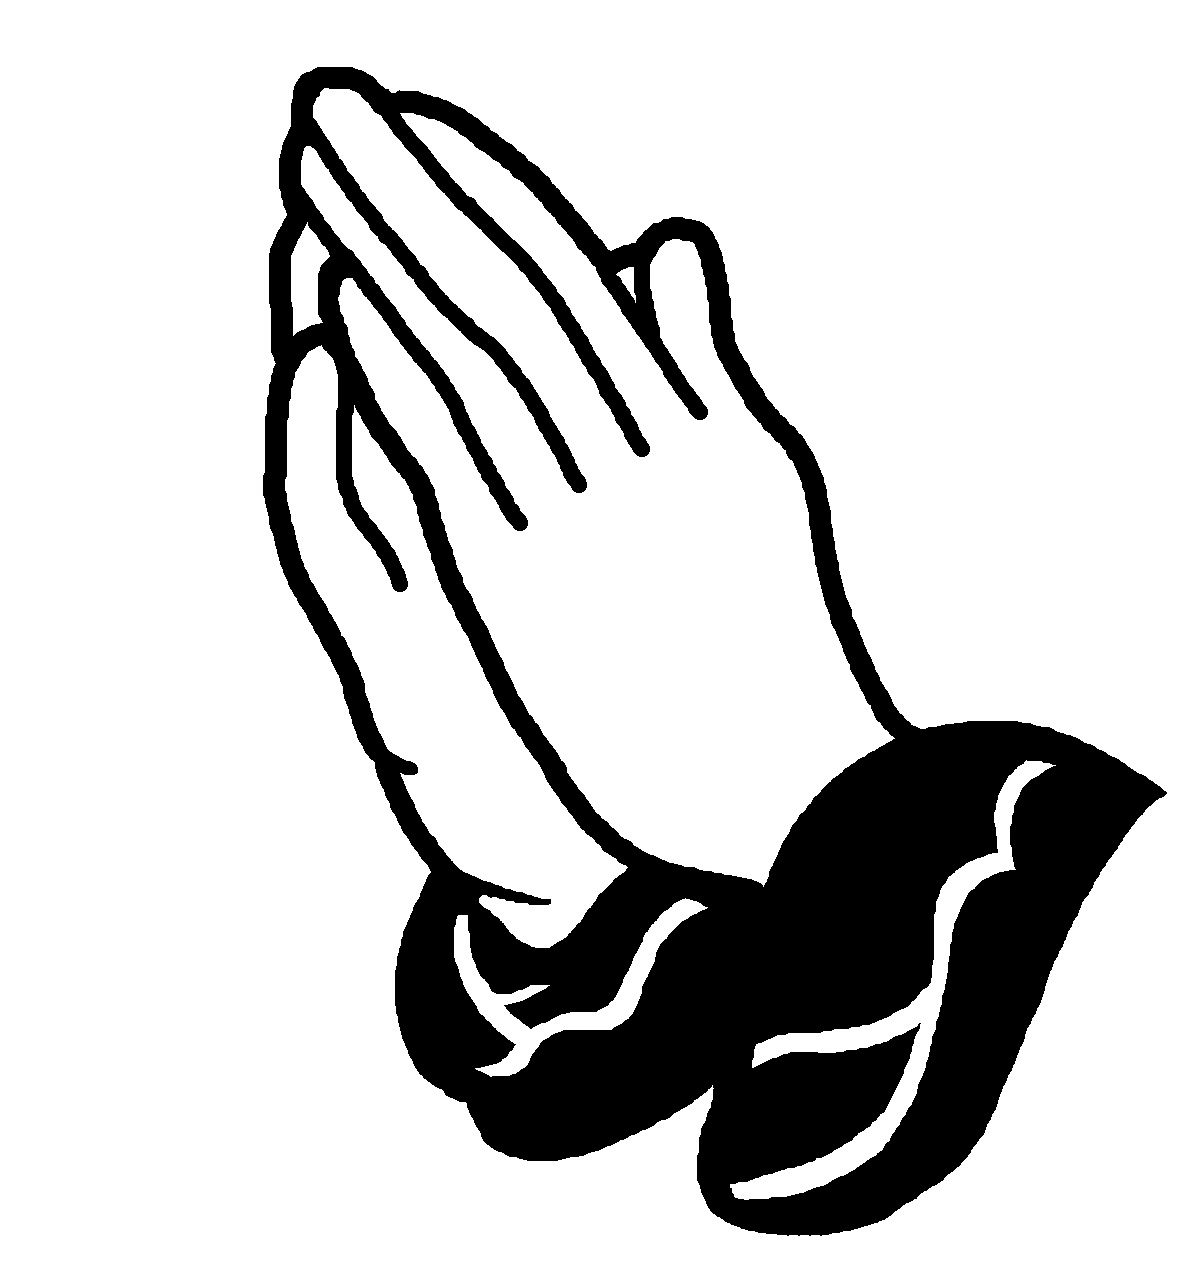 Hands That Are Praying - ClipArt Best